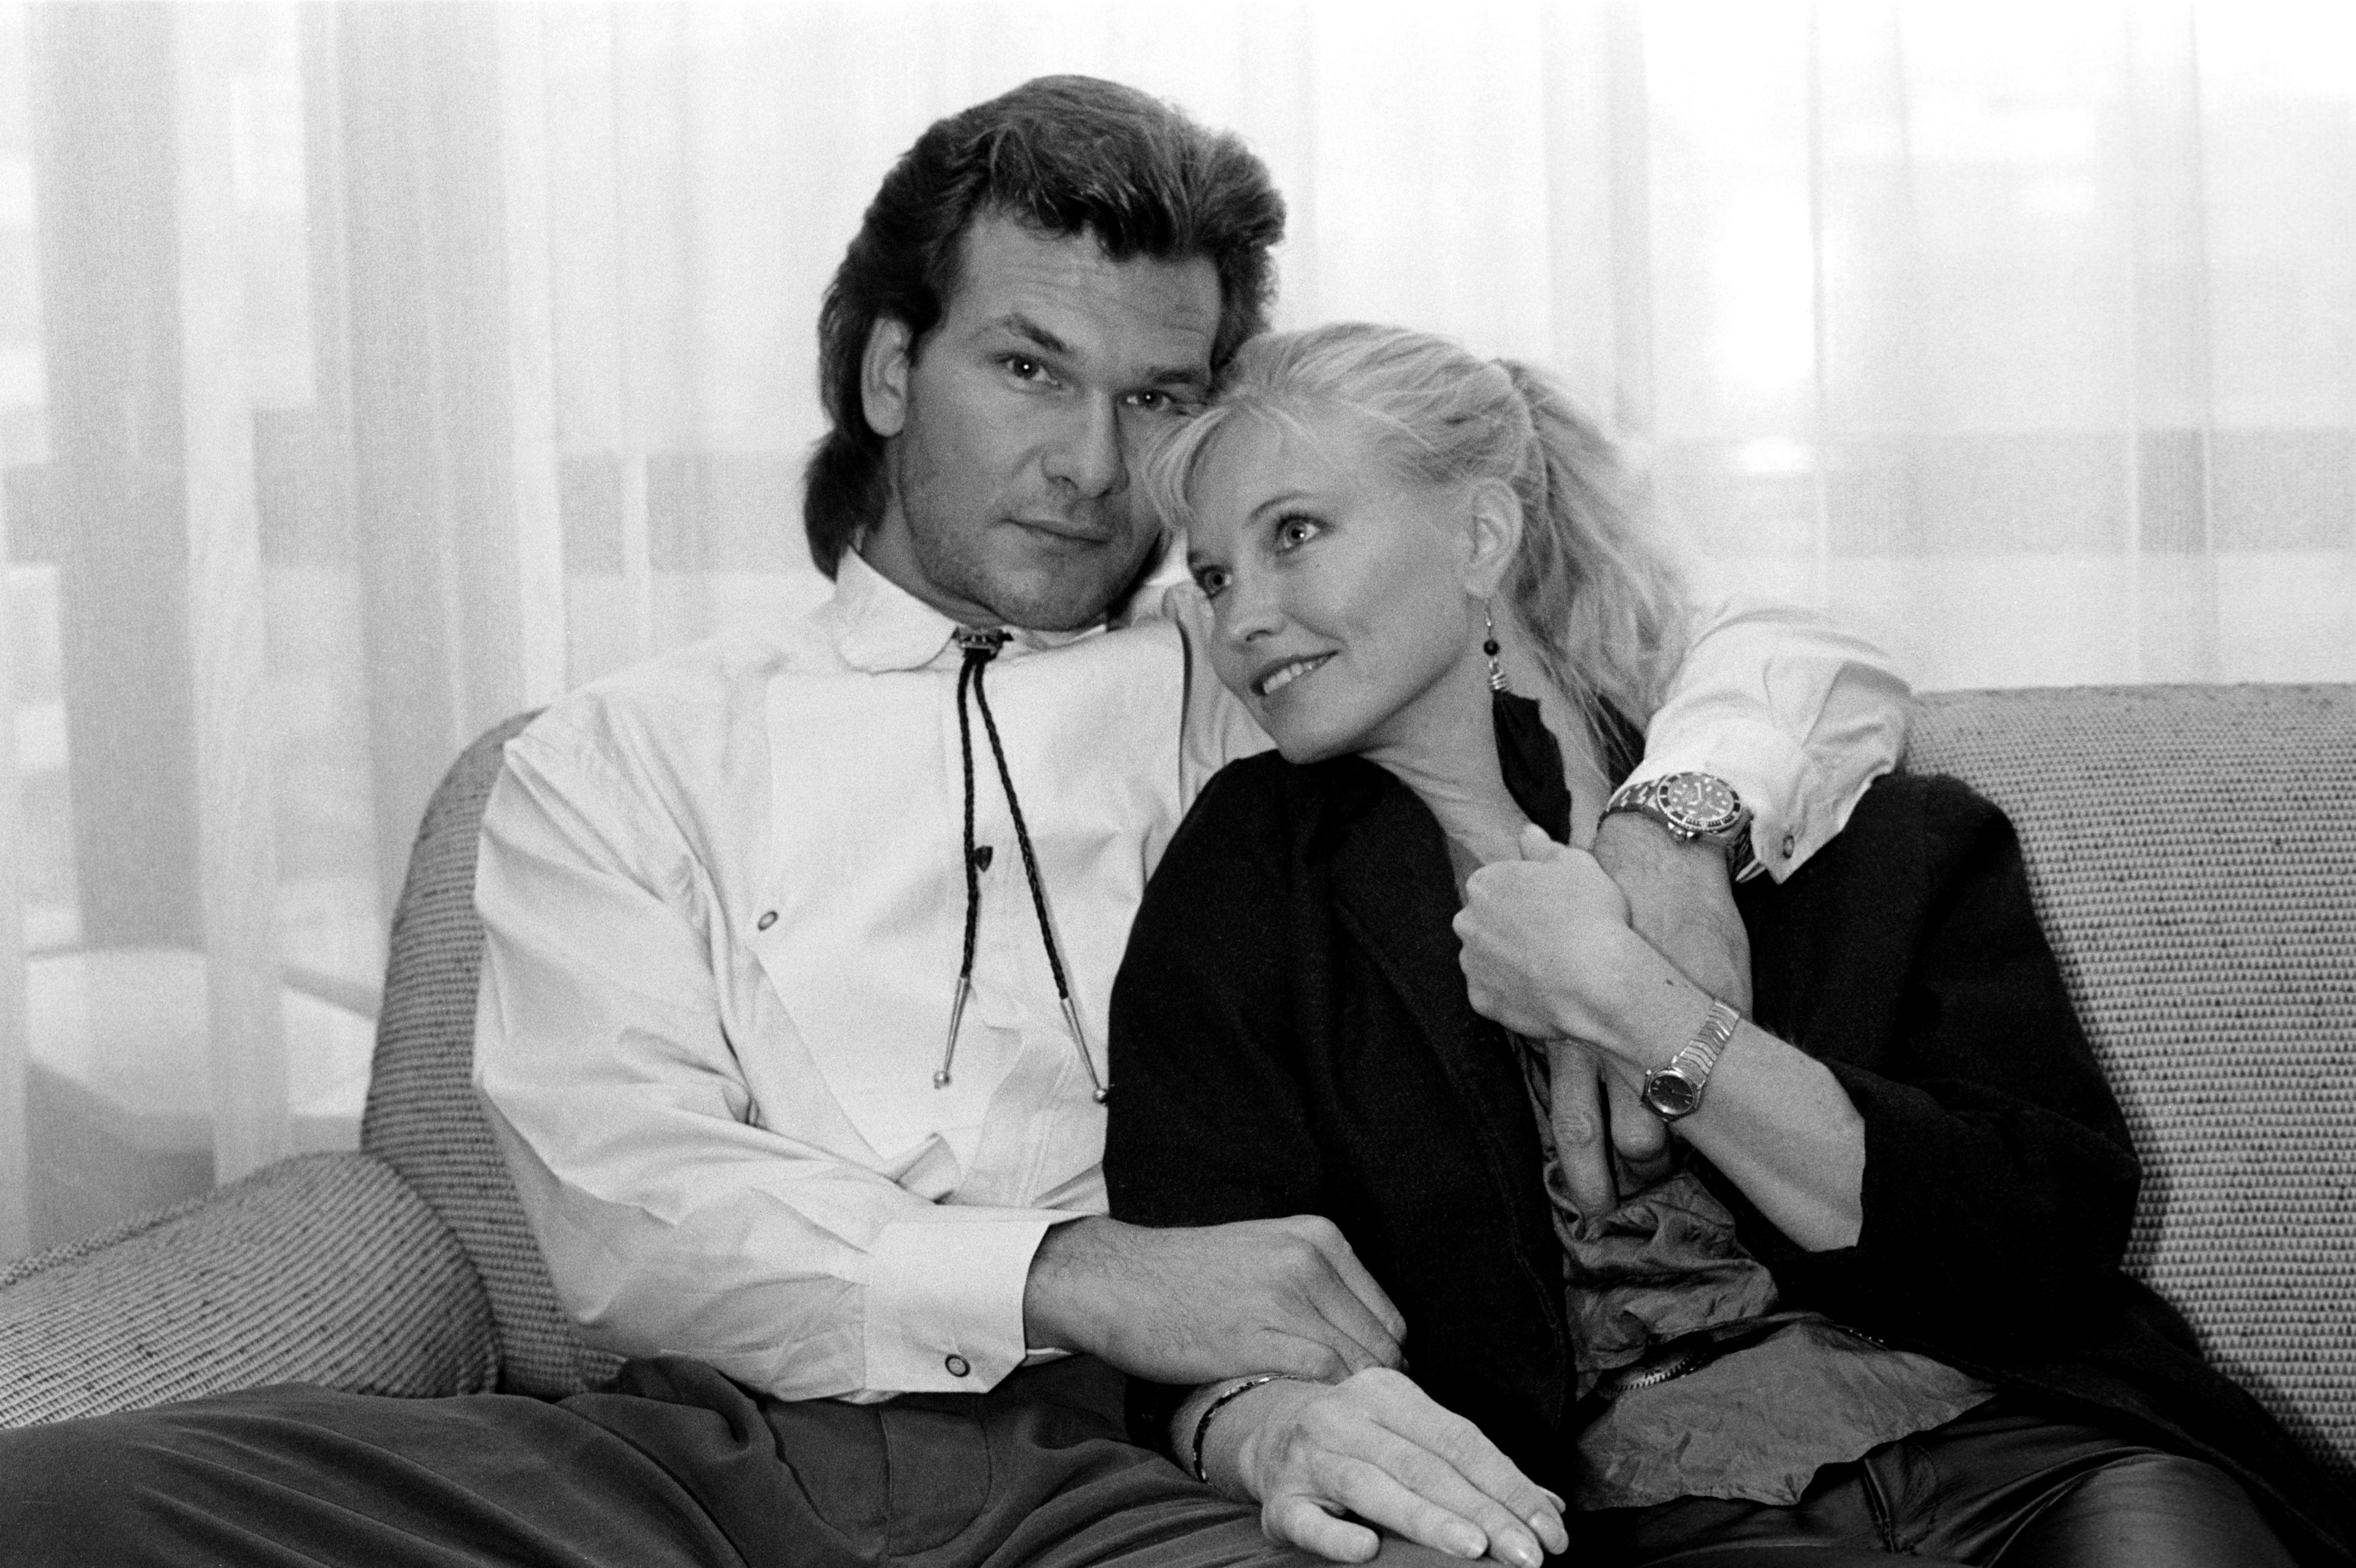 American actor Patrick Swayze dances with his wife, Lisa Niemi on September 5 1987 | Source: Getty Images